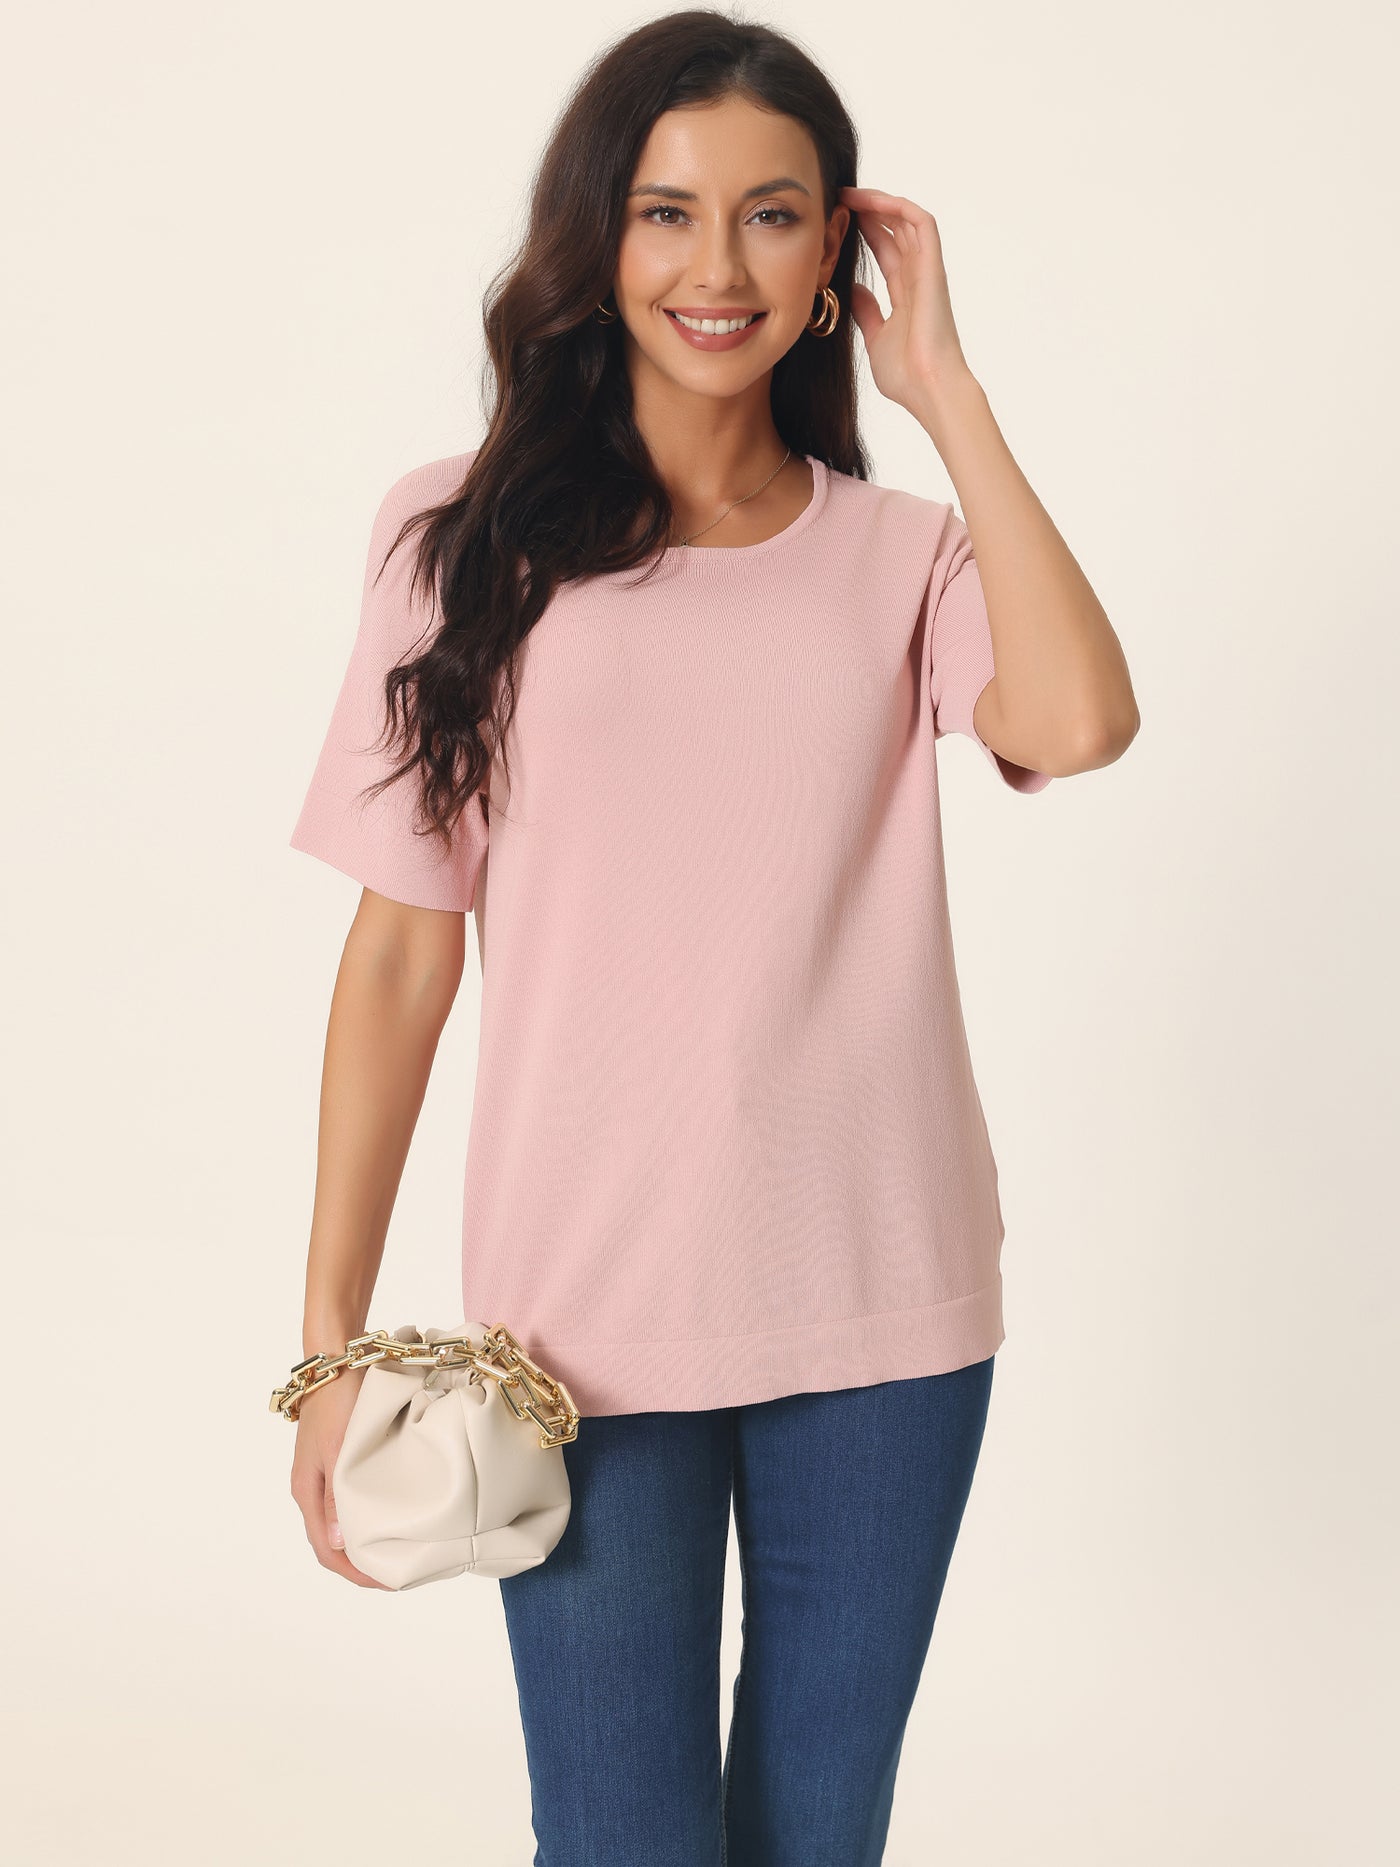 Bublédon Women's Casual Short Sleeve T Shirts Basic Summer Knit Tops Loose Solid Color Blouse